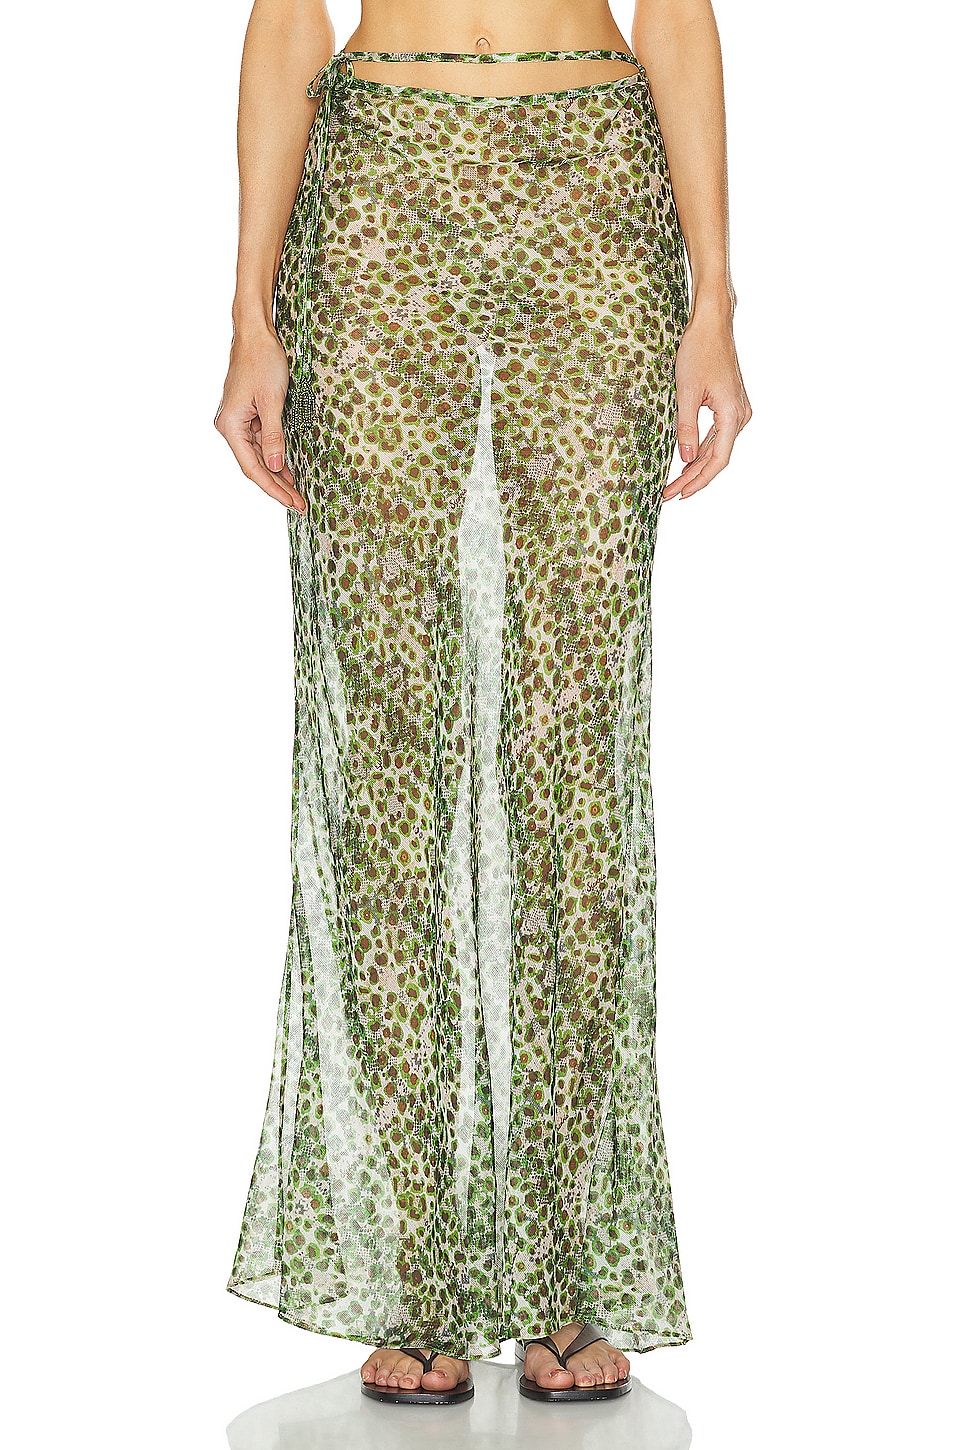 Image 1 of SIEDRES Siny Maxi Skirt in Multi